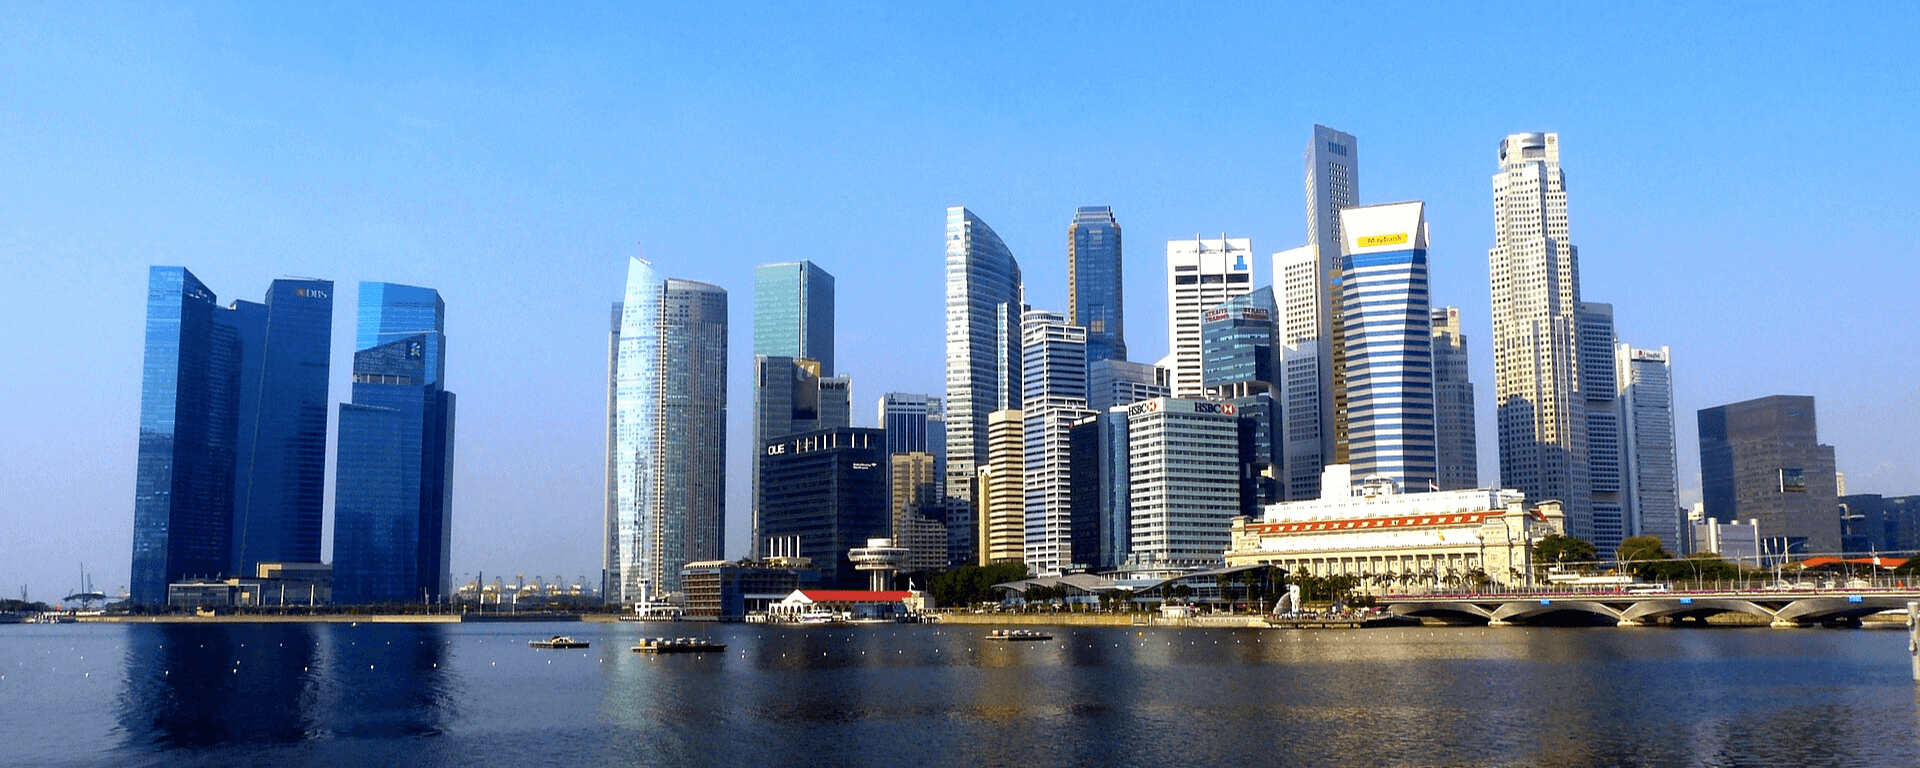 Singapore Tourist Attractions